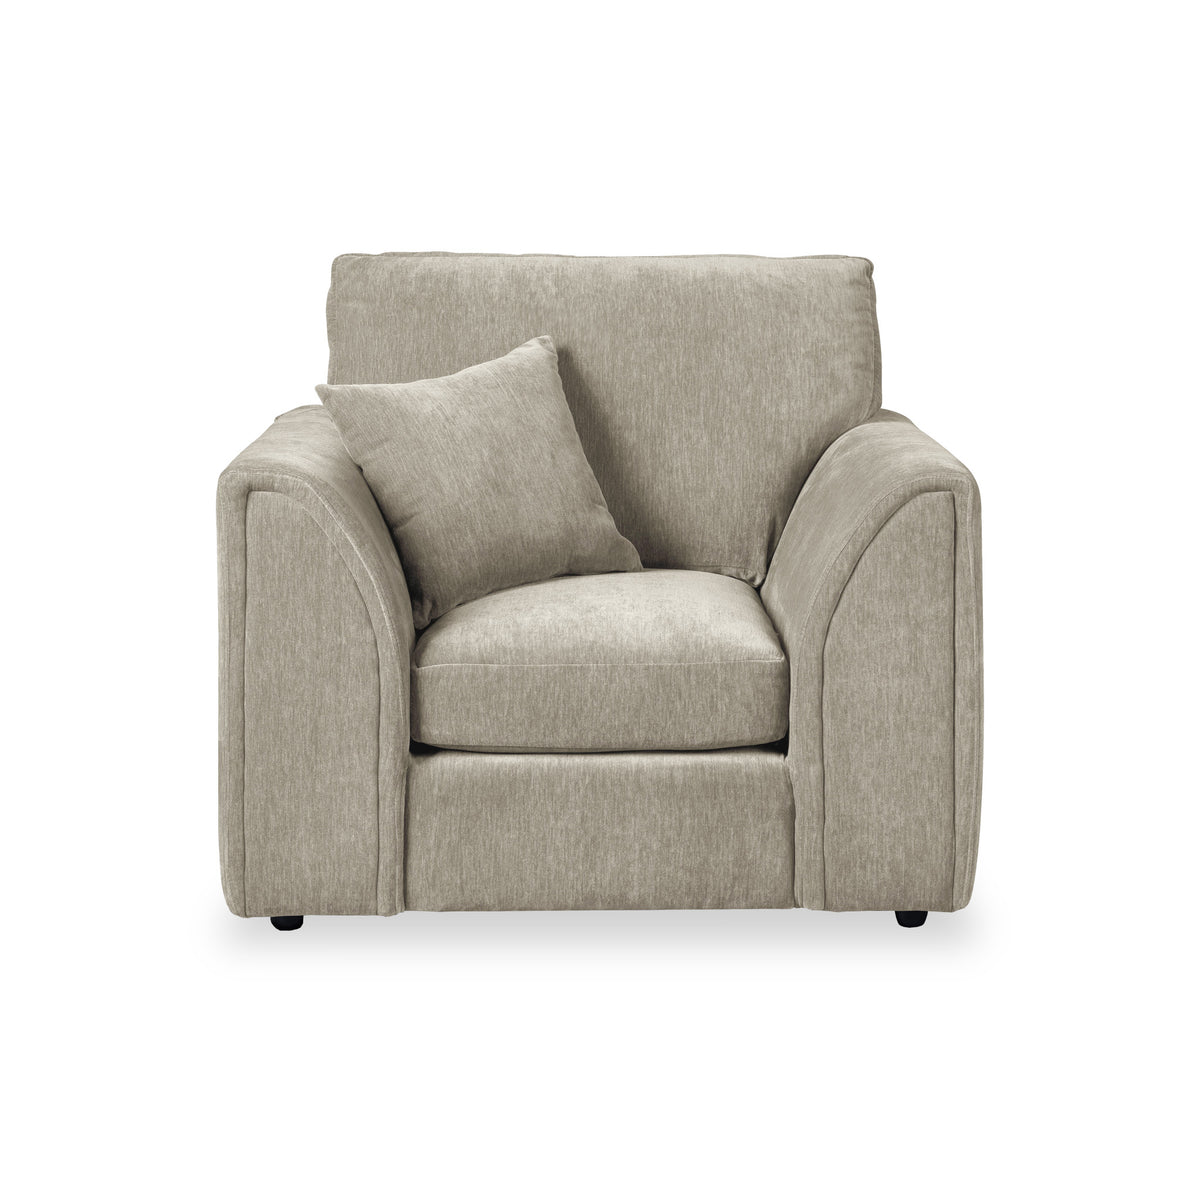 Dunford Mink Armchair from Roseland Furniture